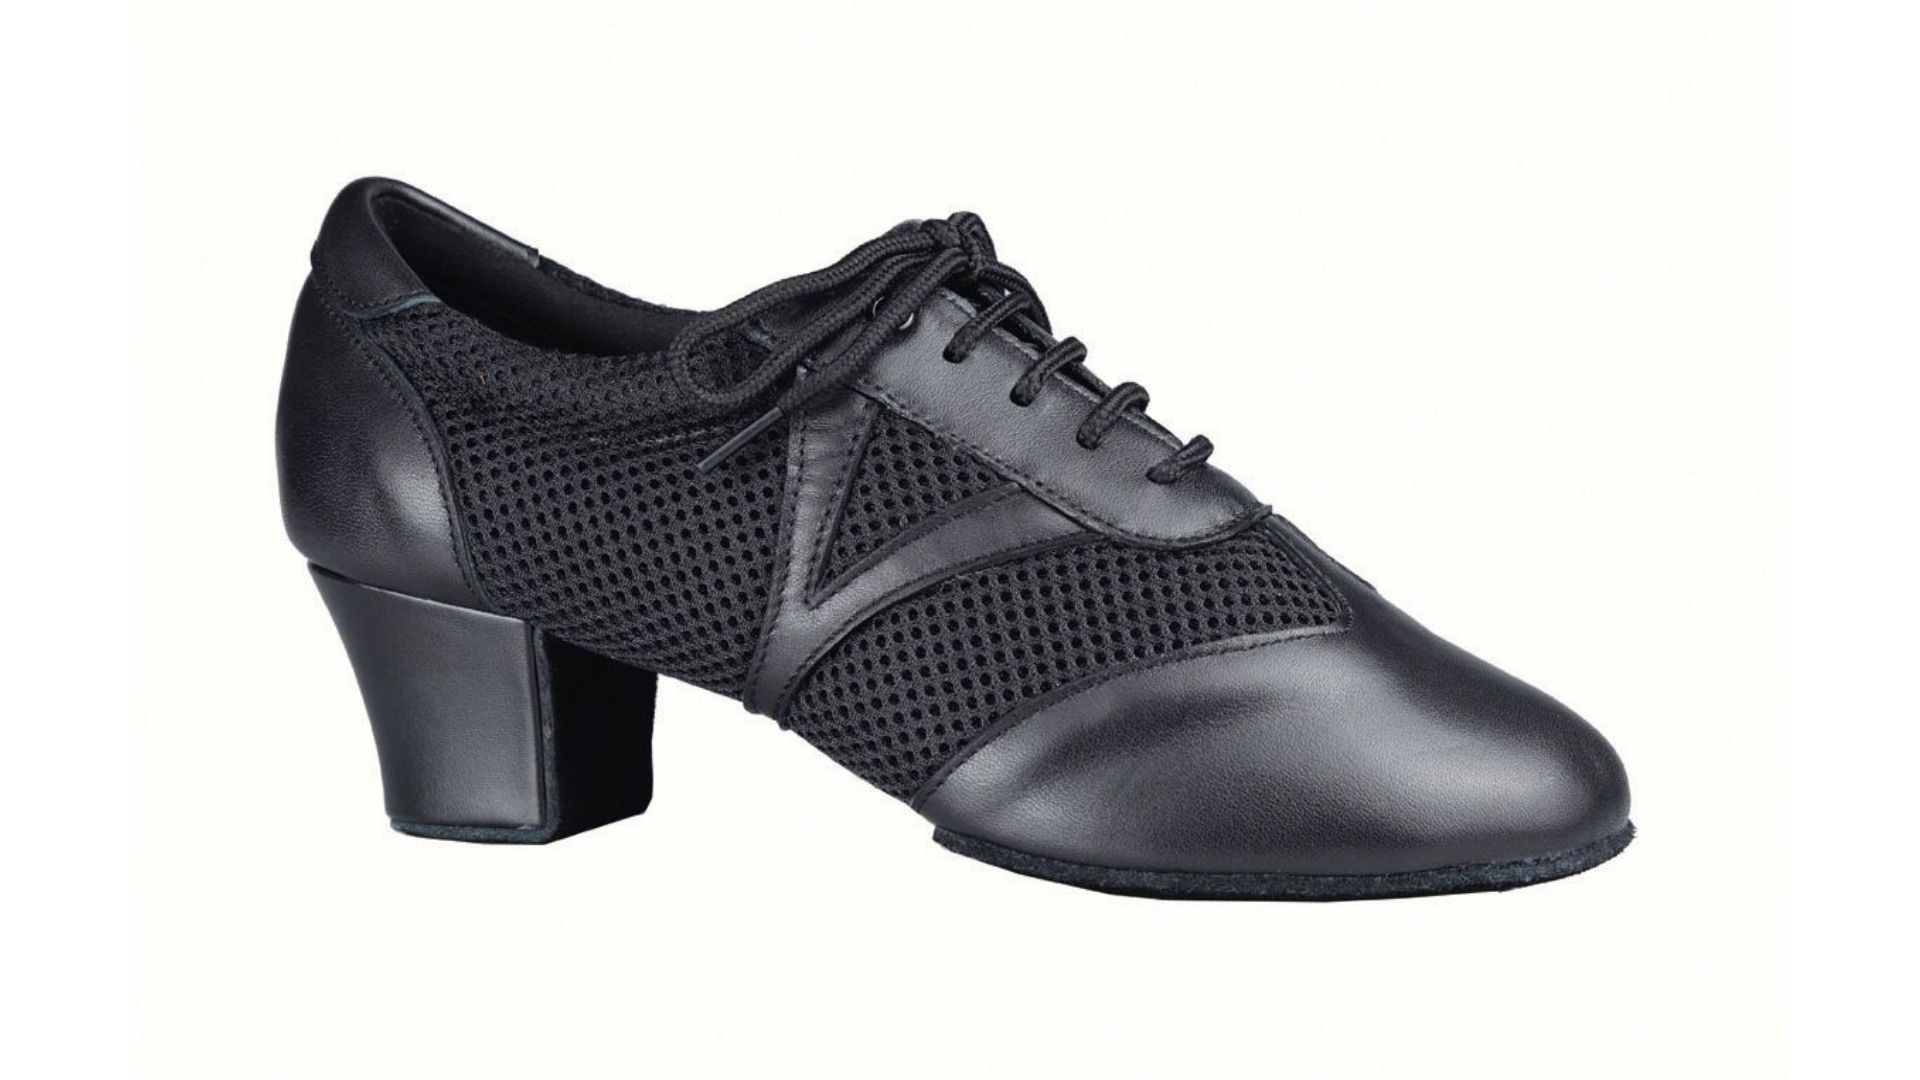 astronomie Glans ingewikkeld Your Guide to the Best Ballroom Dance Shoes